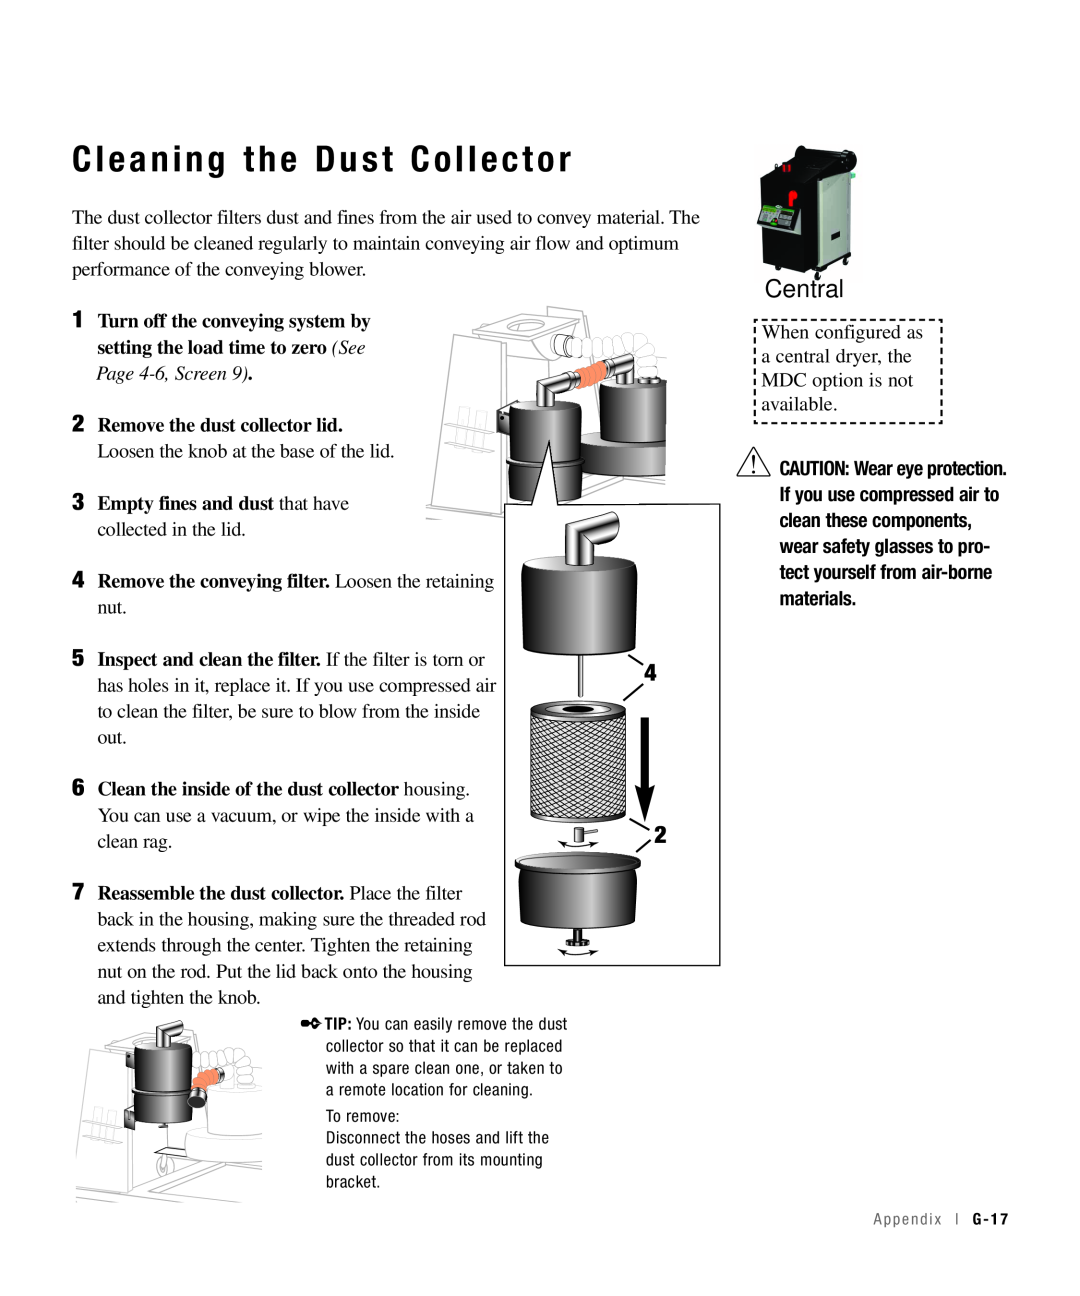 Conair 100, 25, 15, 50 specifications Cleaning the Dust Collector, Central, Page 4-6,Screen, Remove the dust collector lid 